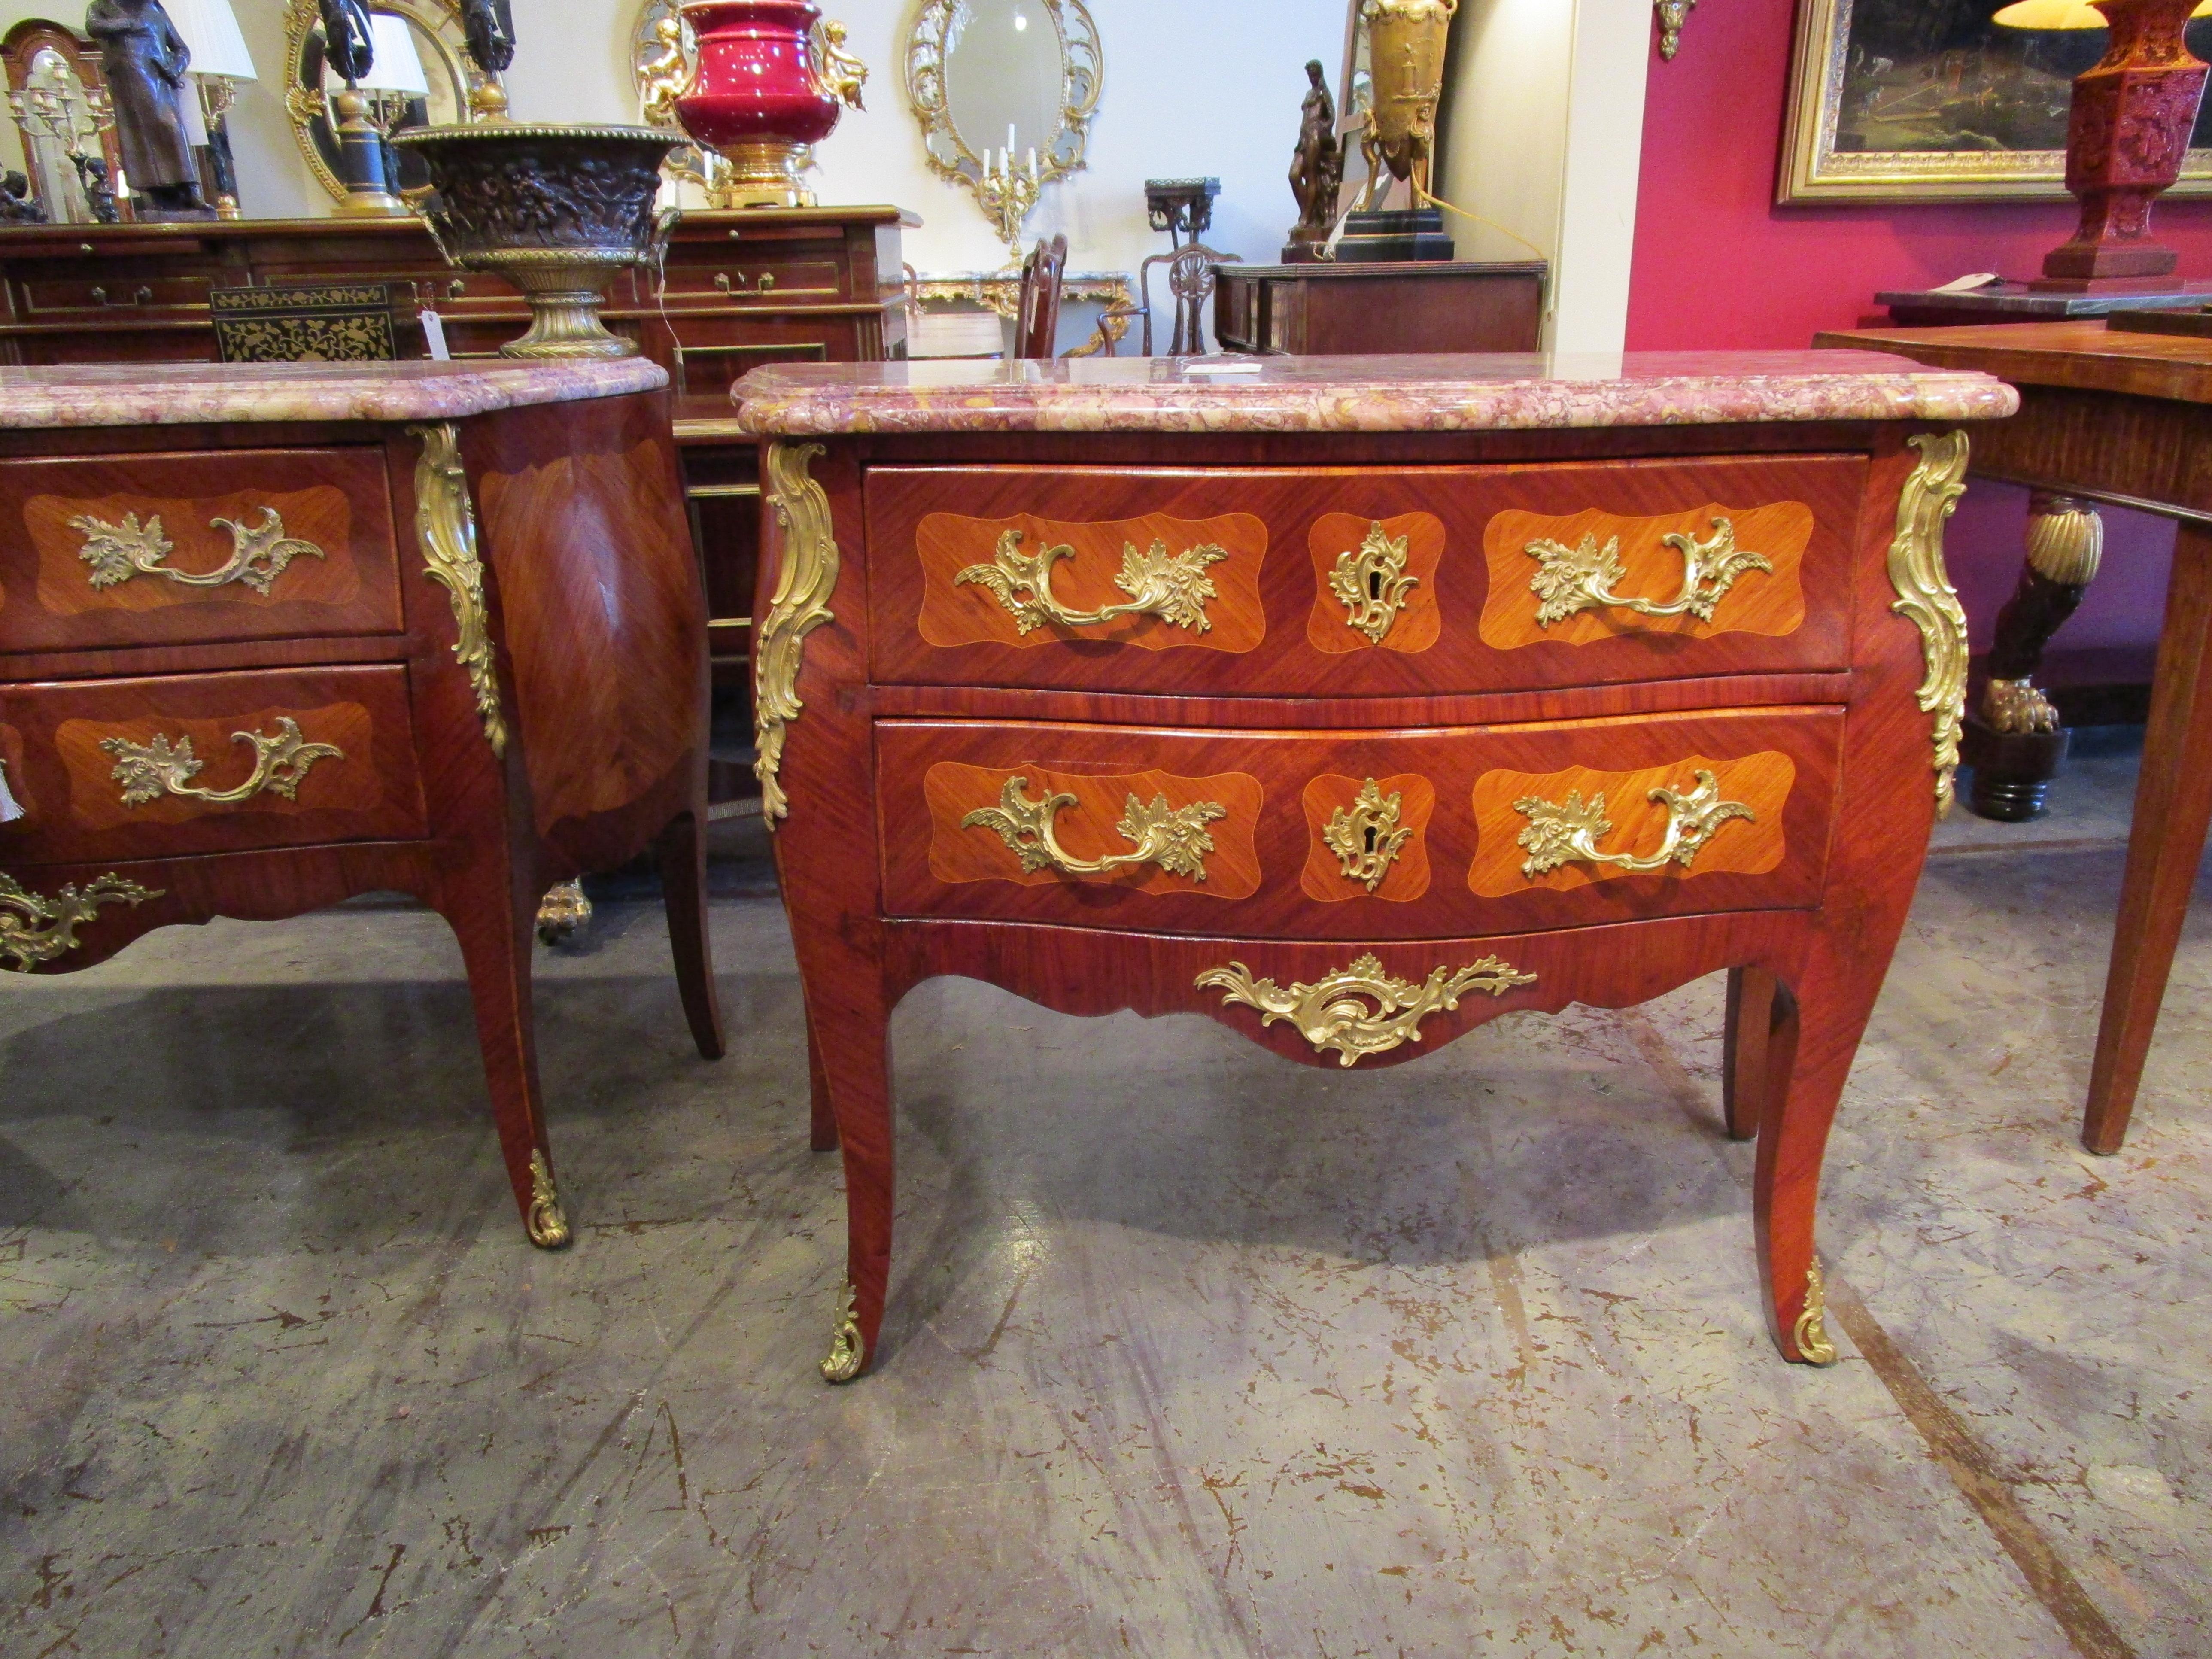 A fine pair of late 19th century French Louis XV kingwood and satinwood gilt bronze mounted commodes. Original breccia marble tops and fine gilt bronze mounts. Stamped illegibly CHARDO with a Fleur de lis in the center of the stamp. Possibly by